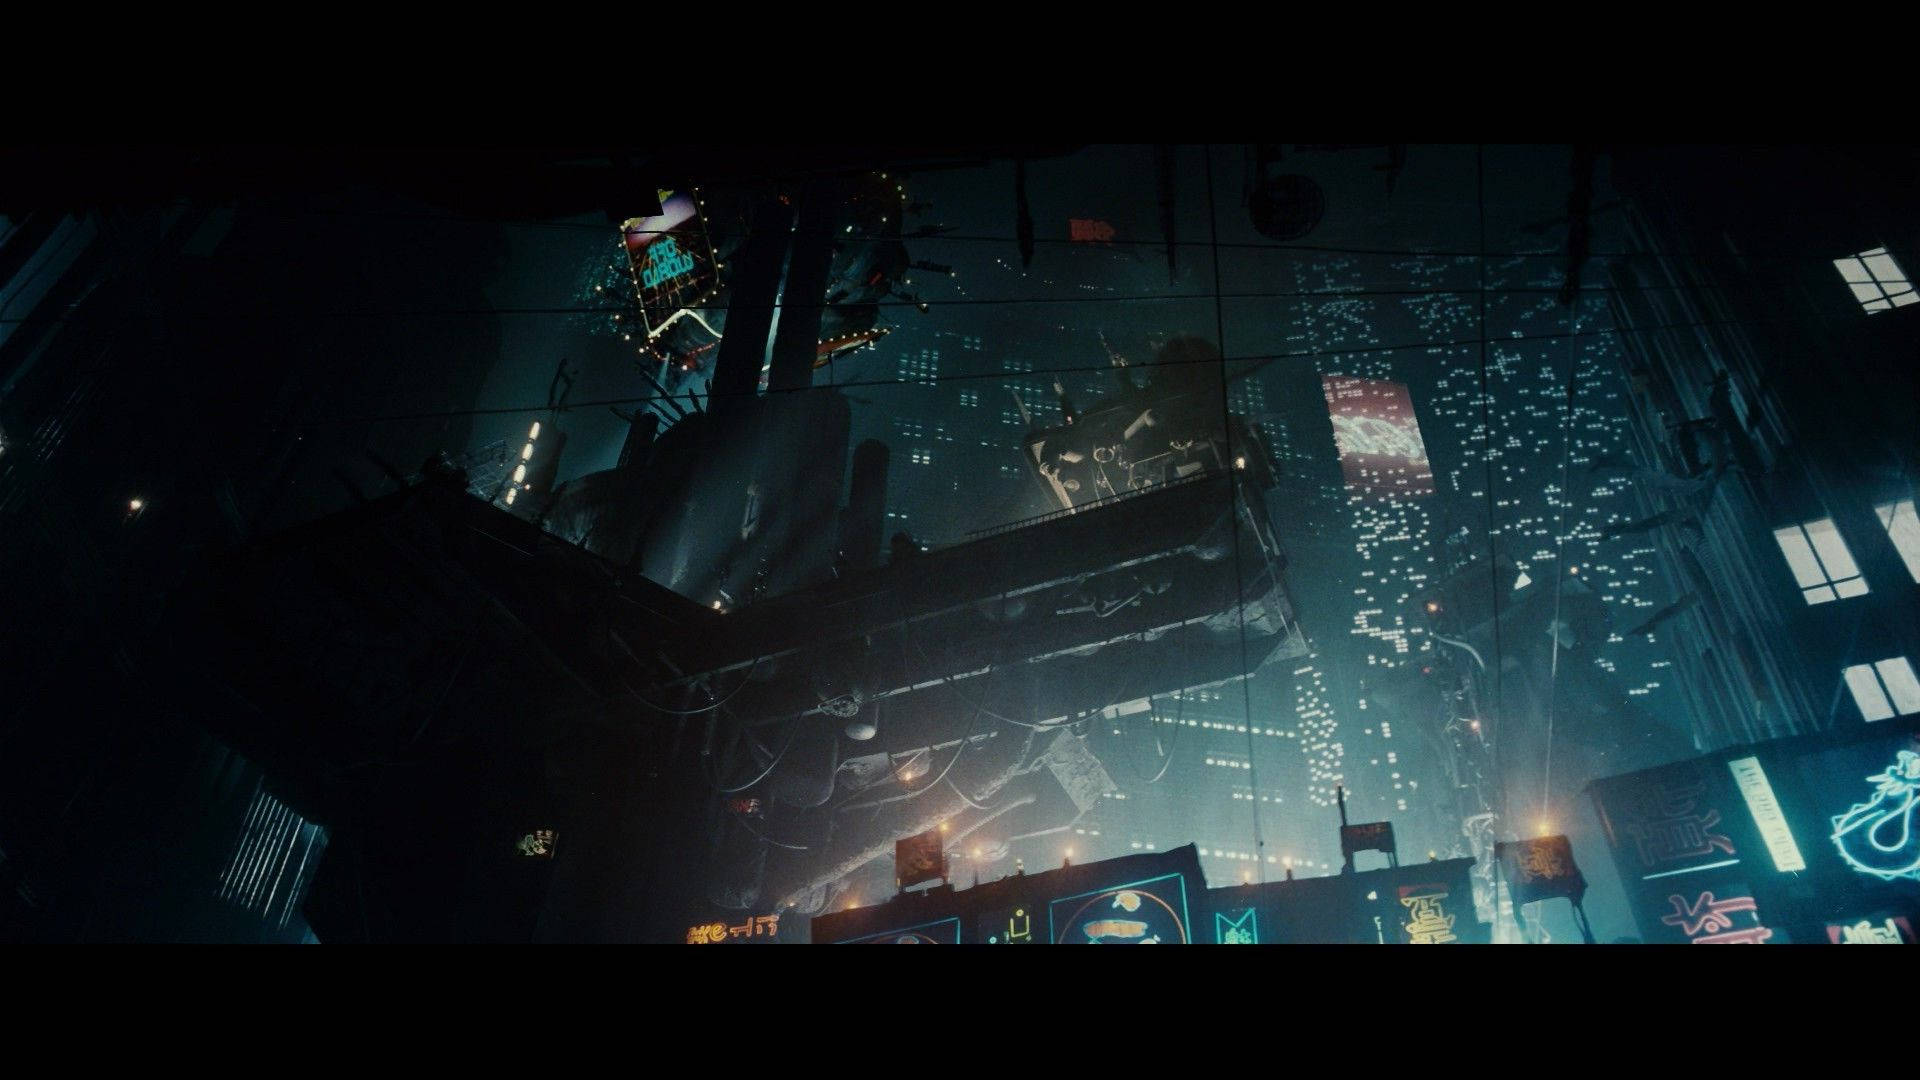 A futuristic landscape in 2049 Los Angeles, as seen in Blade Runner Wallpaper